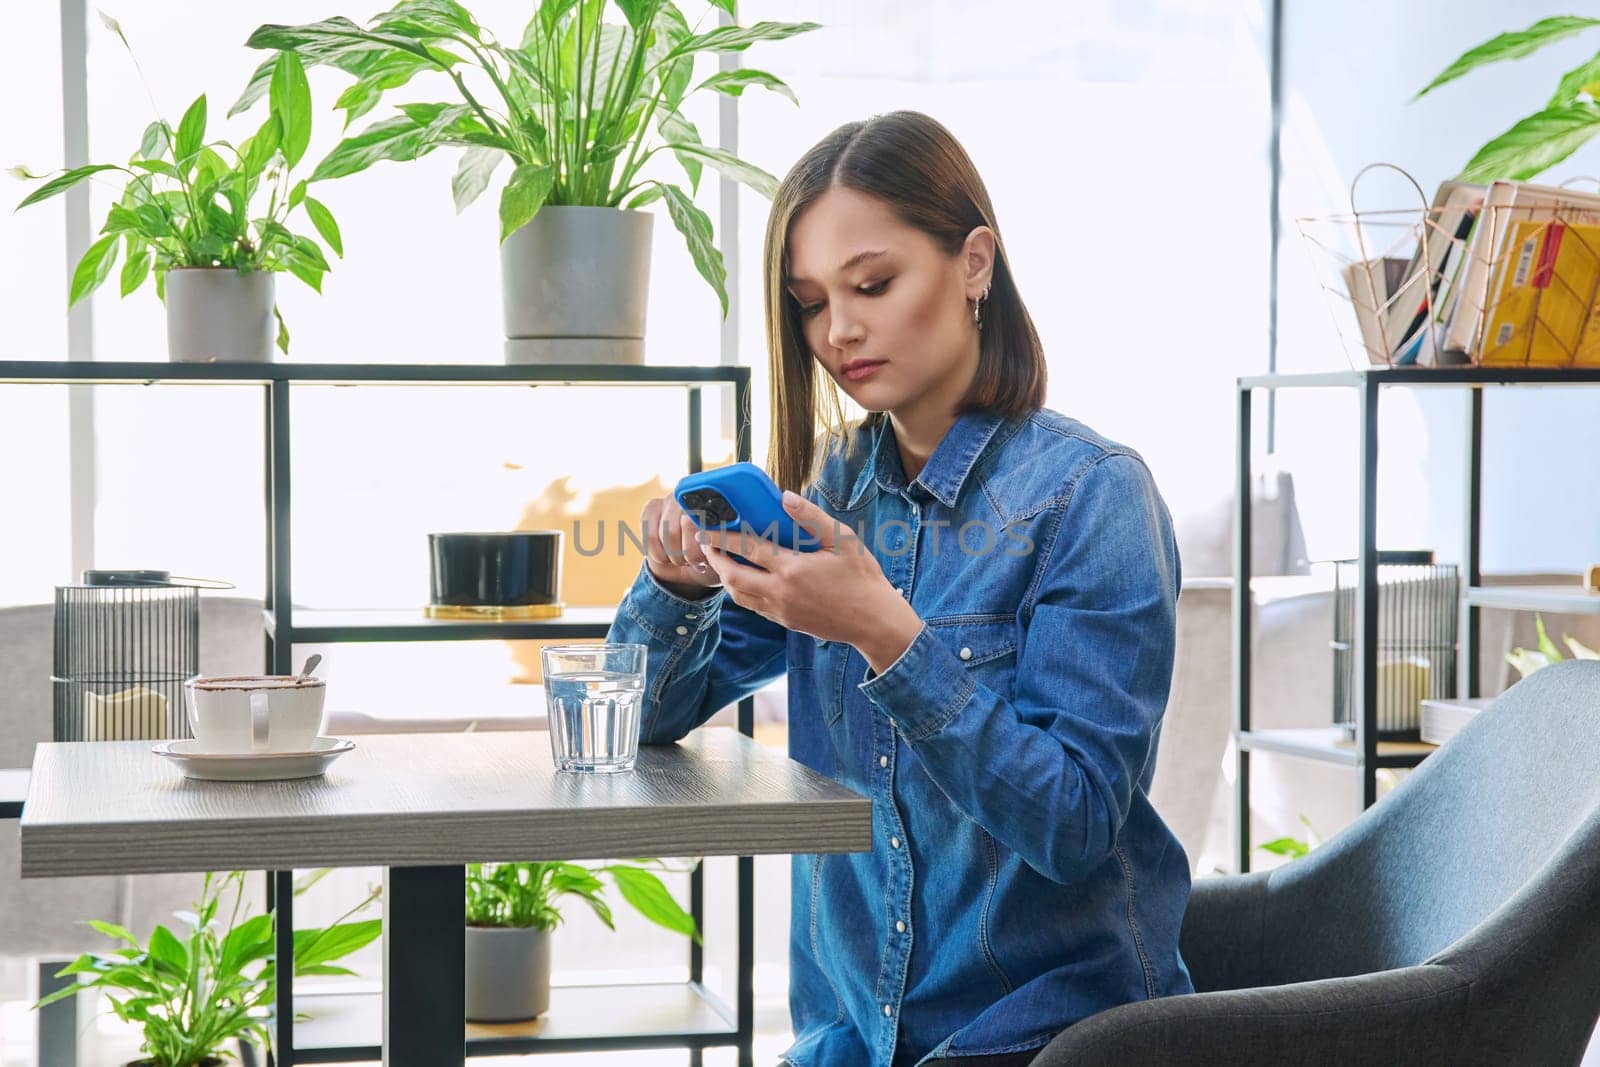 Young attractive woman using smartphone, drinking cup of coffee, glass of water, sitting in cafeteria, cafe. Serious female holding mobile phone, texting messages. Technology lifestyle youth concept